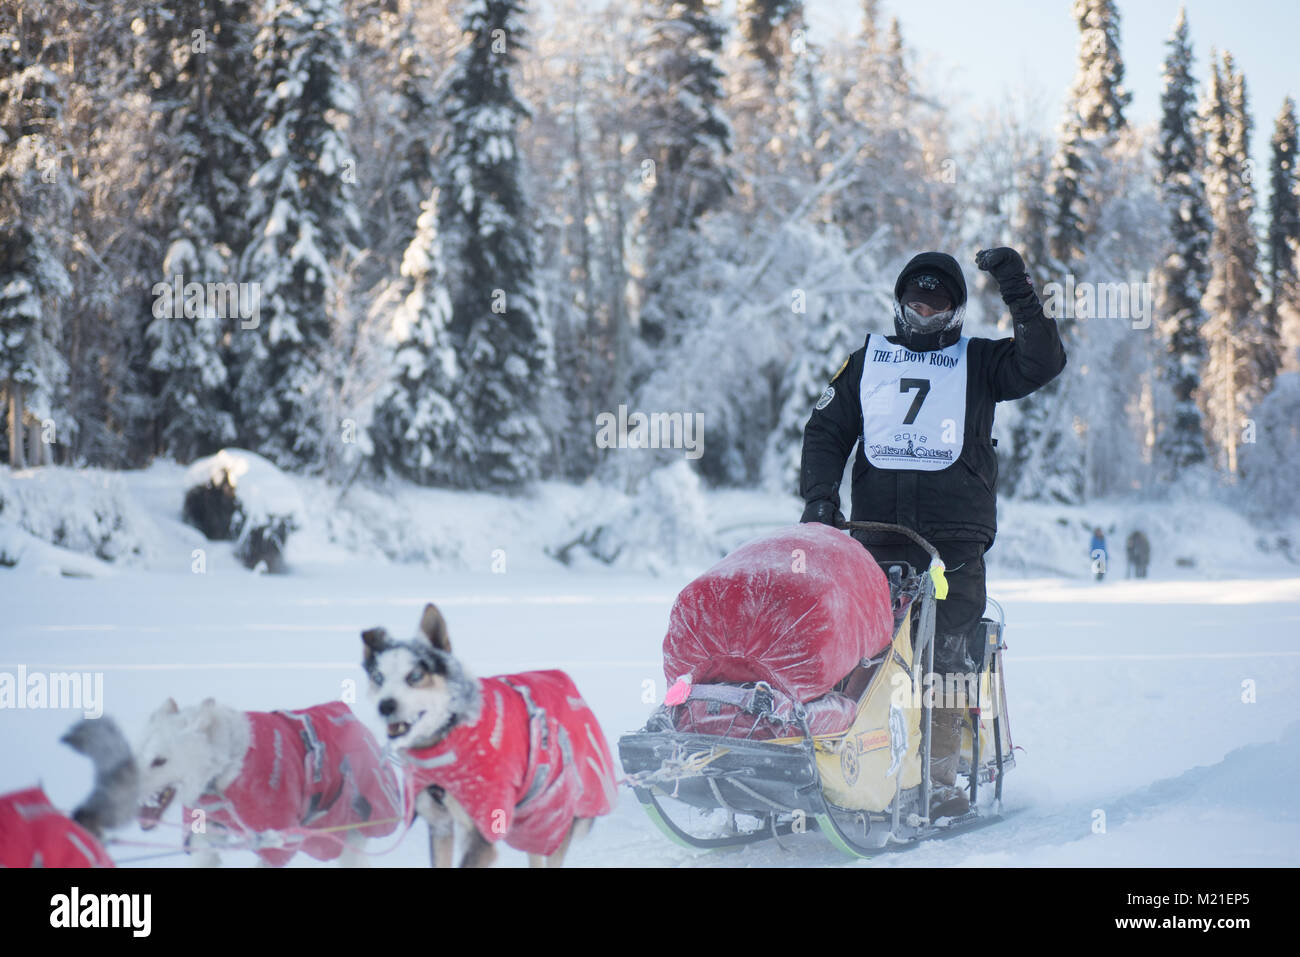 FAIRBANKS, ALASKA - FEBRUARY 3, 2018: Race veteran Matt Hall from Two Rivers, AK, waves to fans as he passes on the Chena River. Credit: Roger Asbury/Alamy Live News Stock Photo